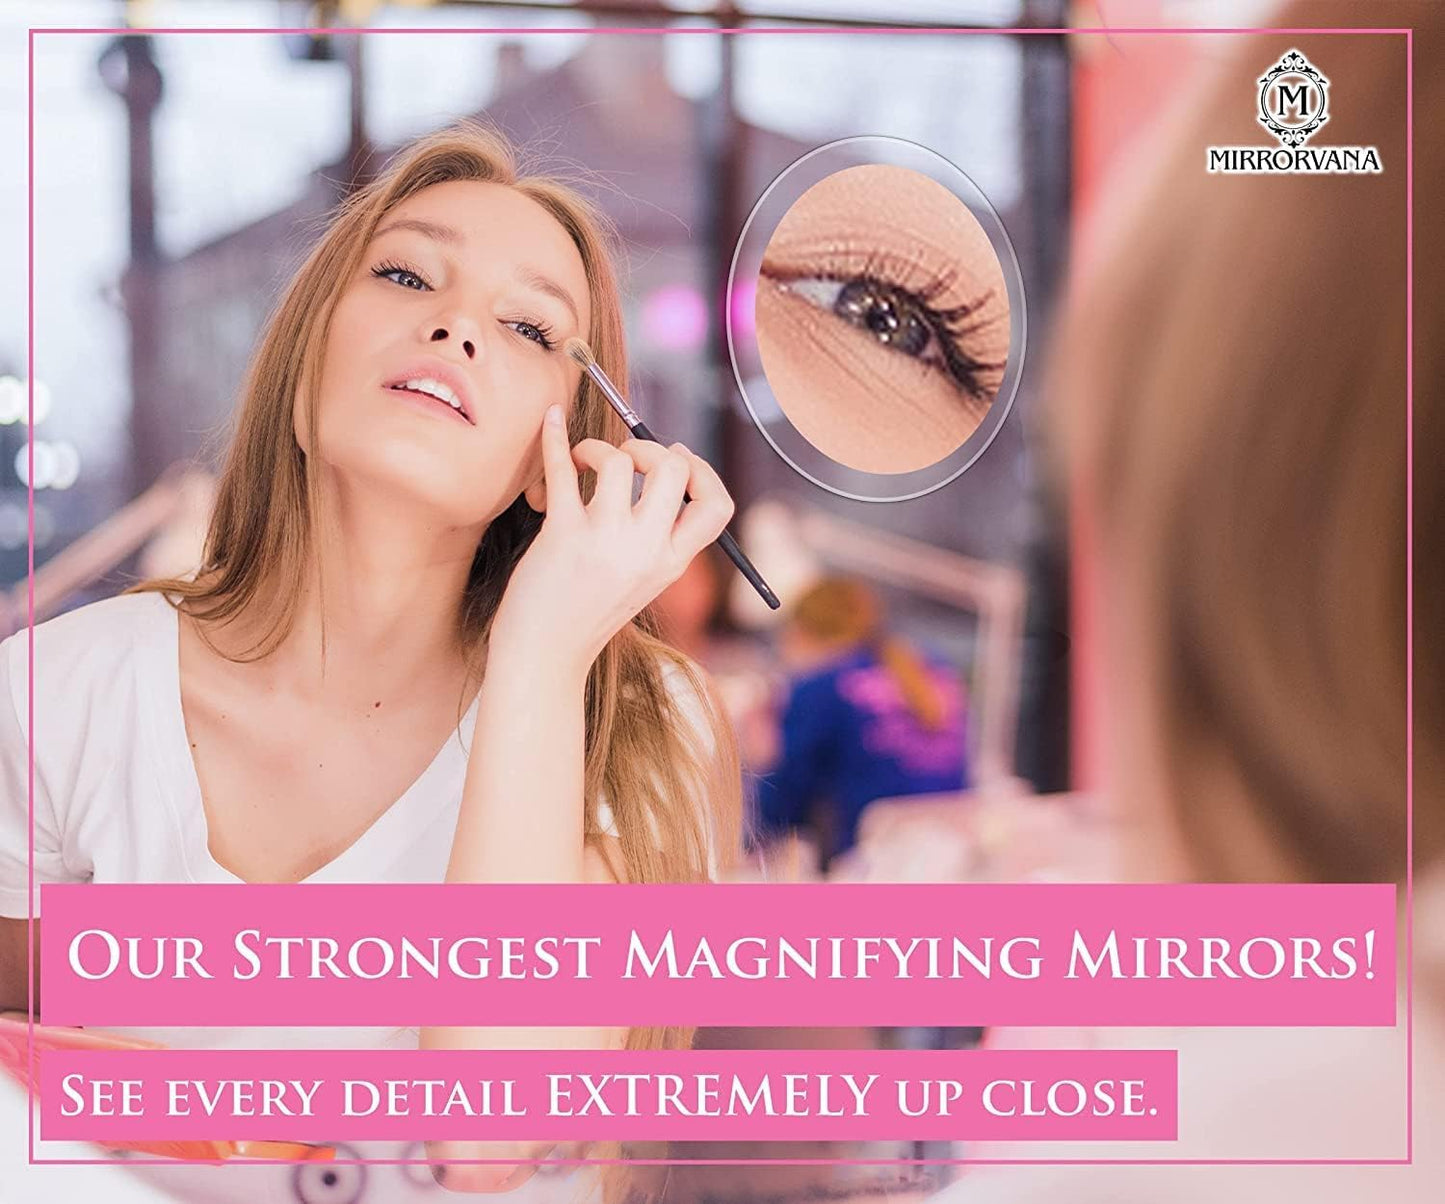 MIRRORVANA 20X & 15X Magnifying Mirror Set with 3 Suction Cups Each - Compact & Travel Ready Mirror for Makeup - Sizes: 6" and 4" Wide